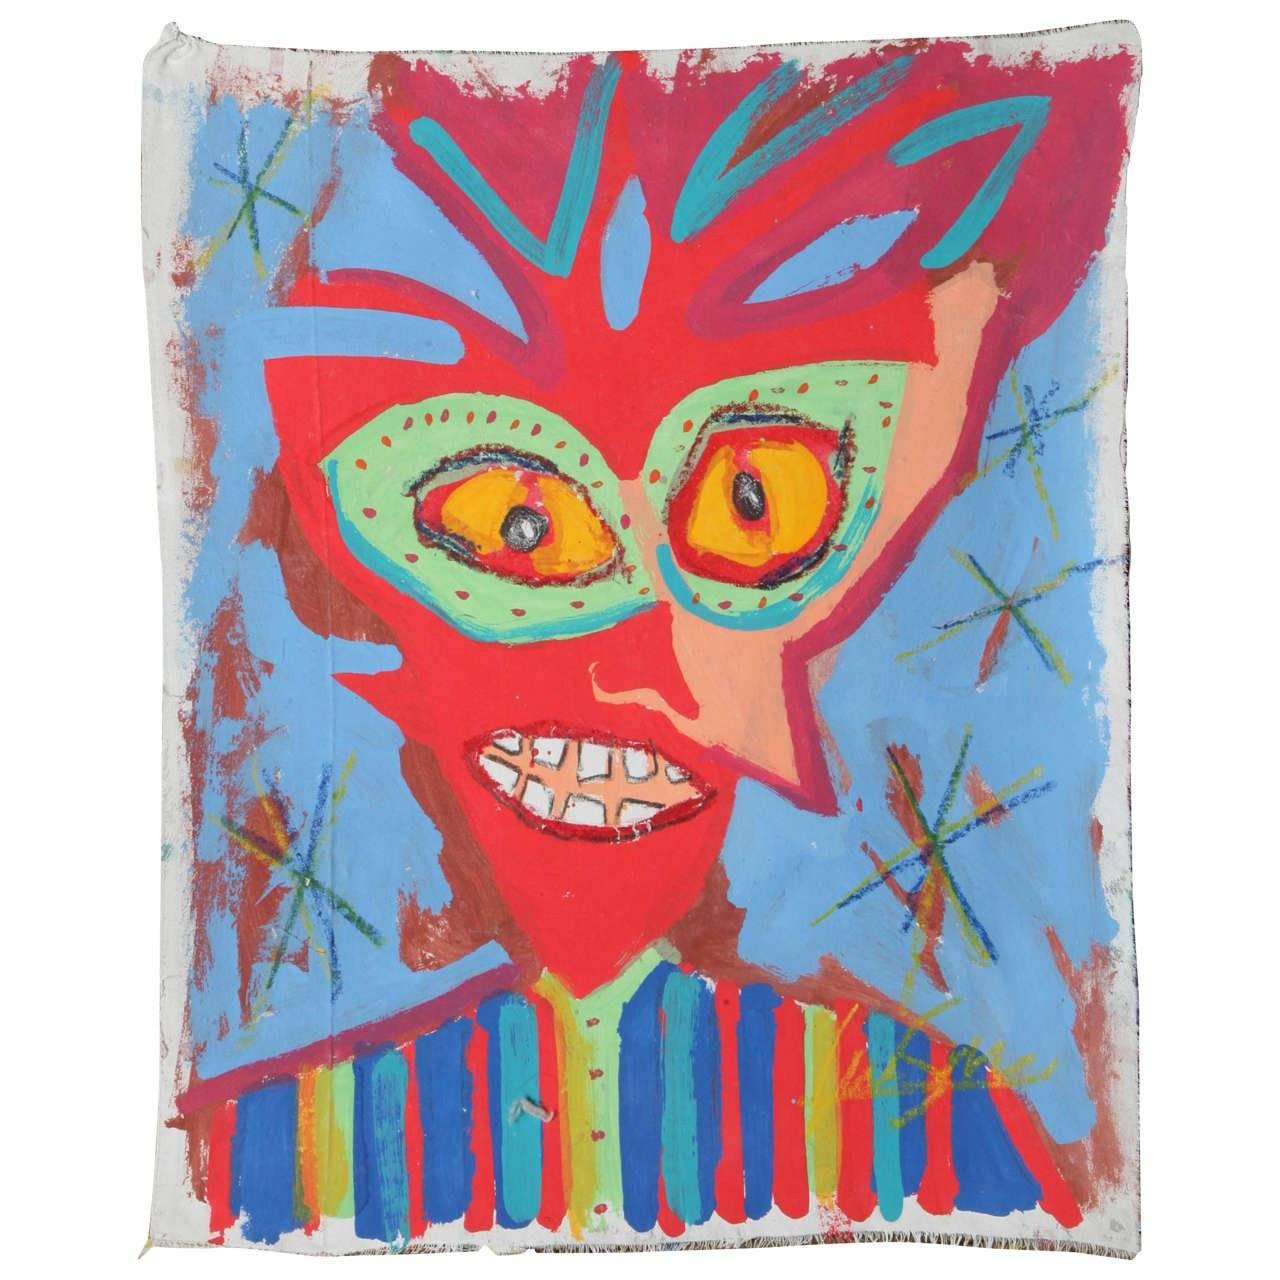 Using brightly saturated colors this painting demands attention with its’ unique subject matter. This portrait depicts a flaming red character with contrasting chartreuse cat eyeglasses to frame their piercing yellow eyes. With basic brush strokes